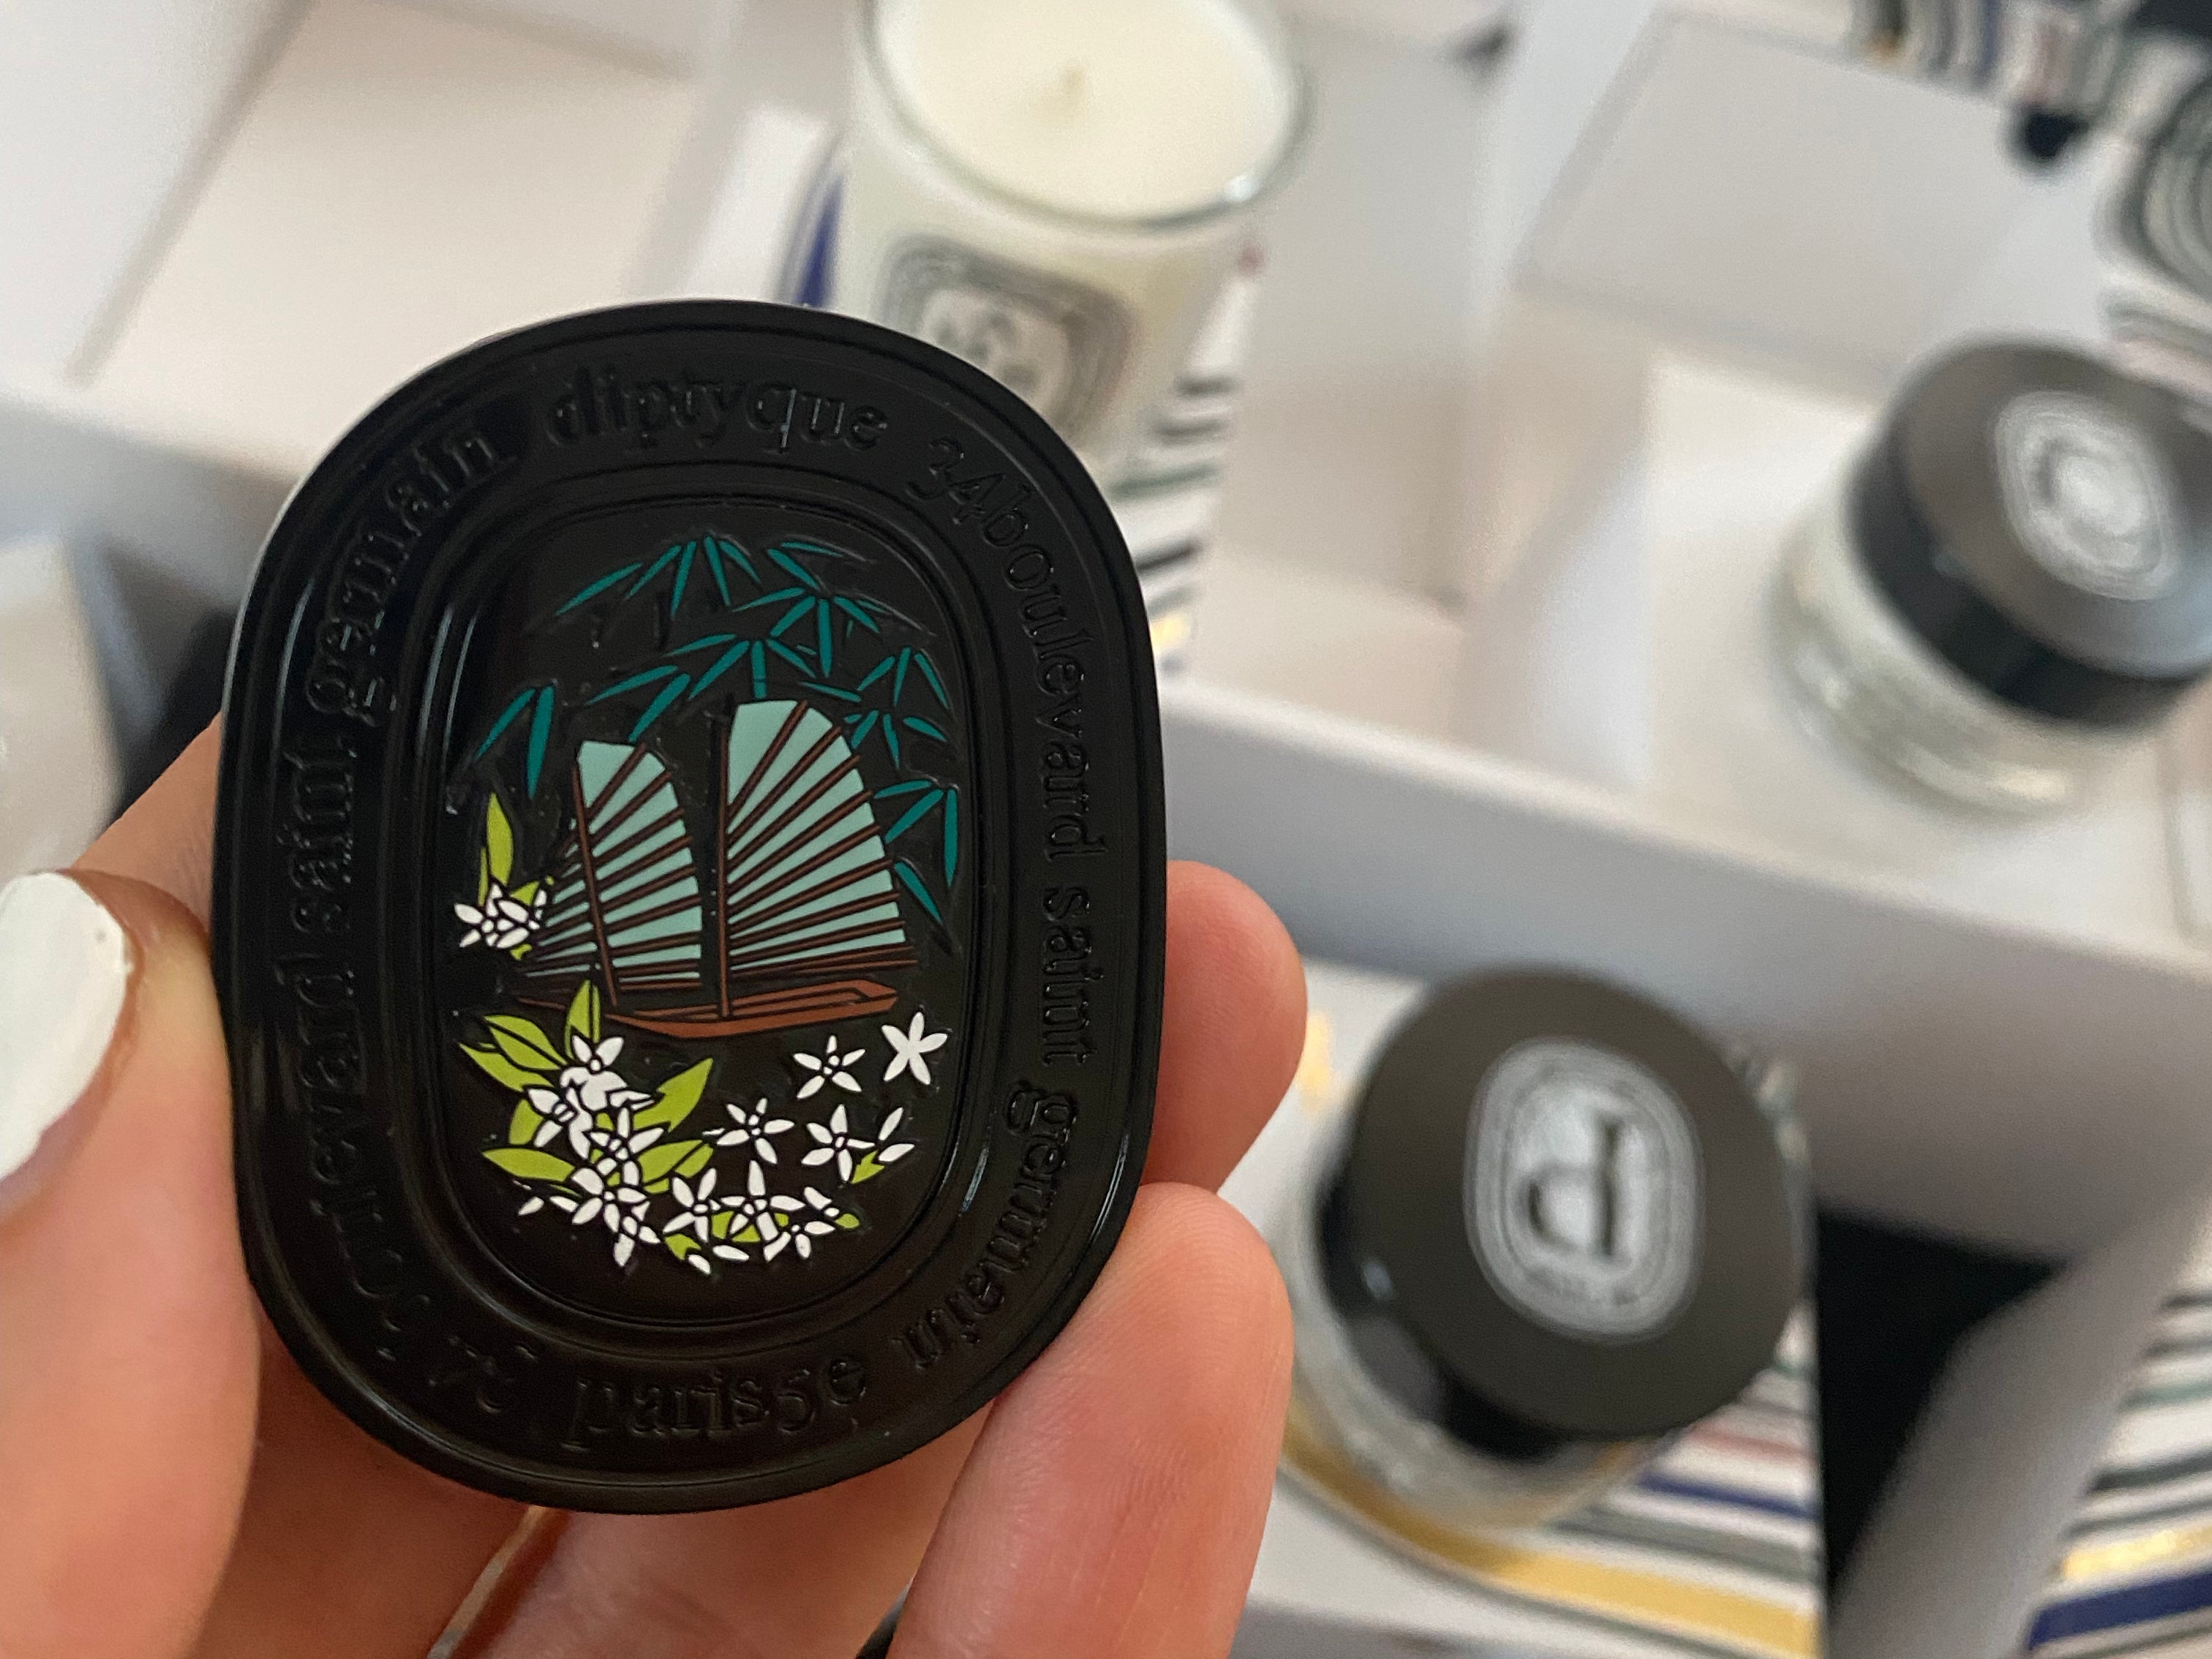 We’re huge fans of this refillable perfumed balm